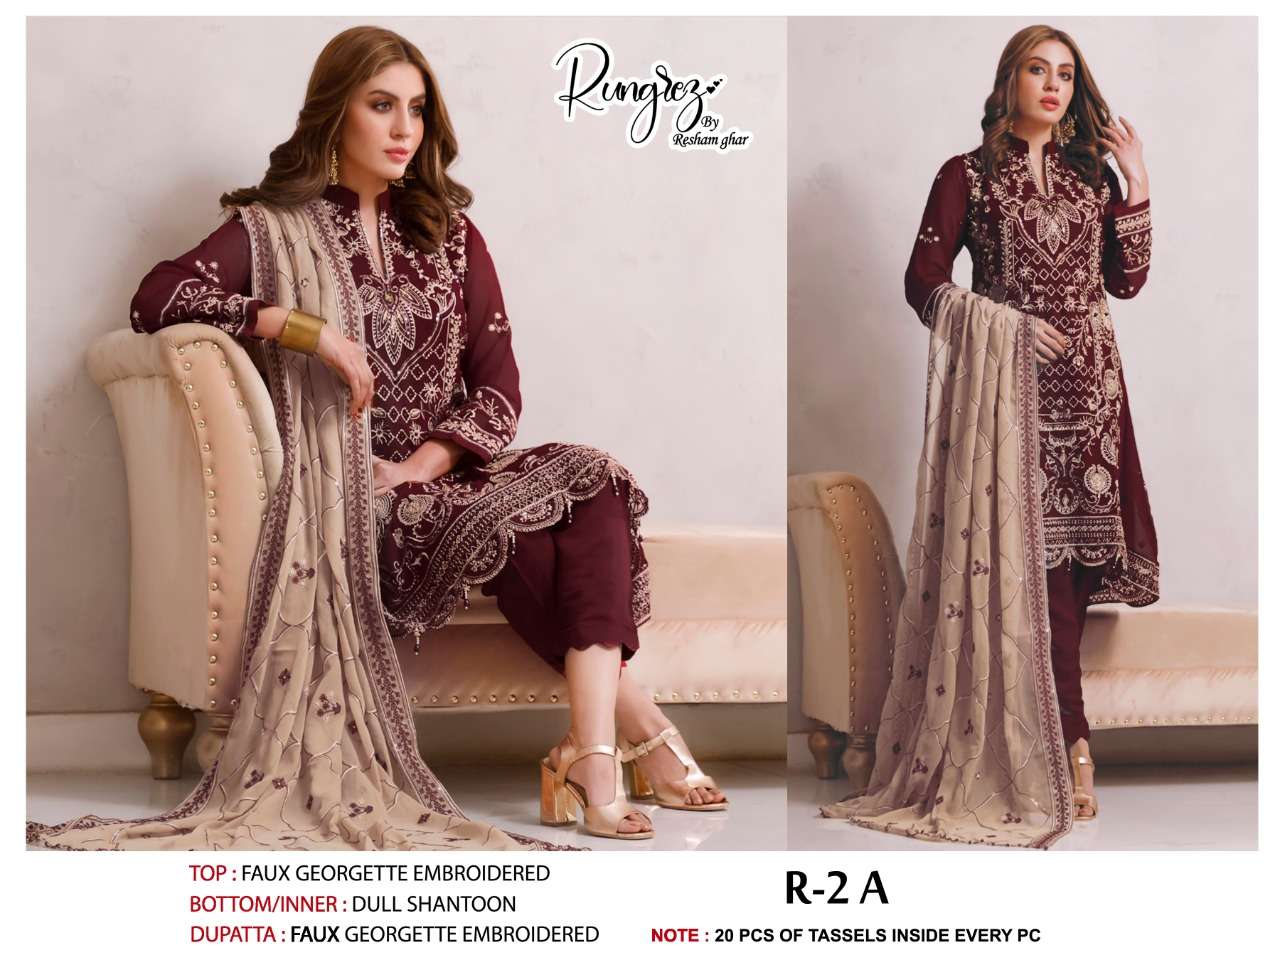 RESHAMGHAR RANGREZ R-2 DESIGNER GEORGETTE EMBROIDERED PARTY WEAR SUITS IN WHOLESALE RATE